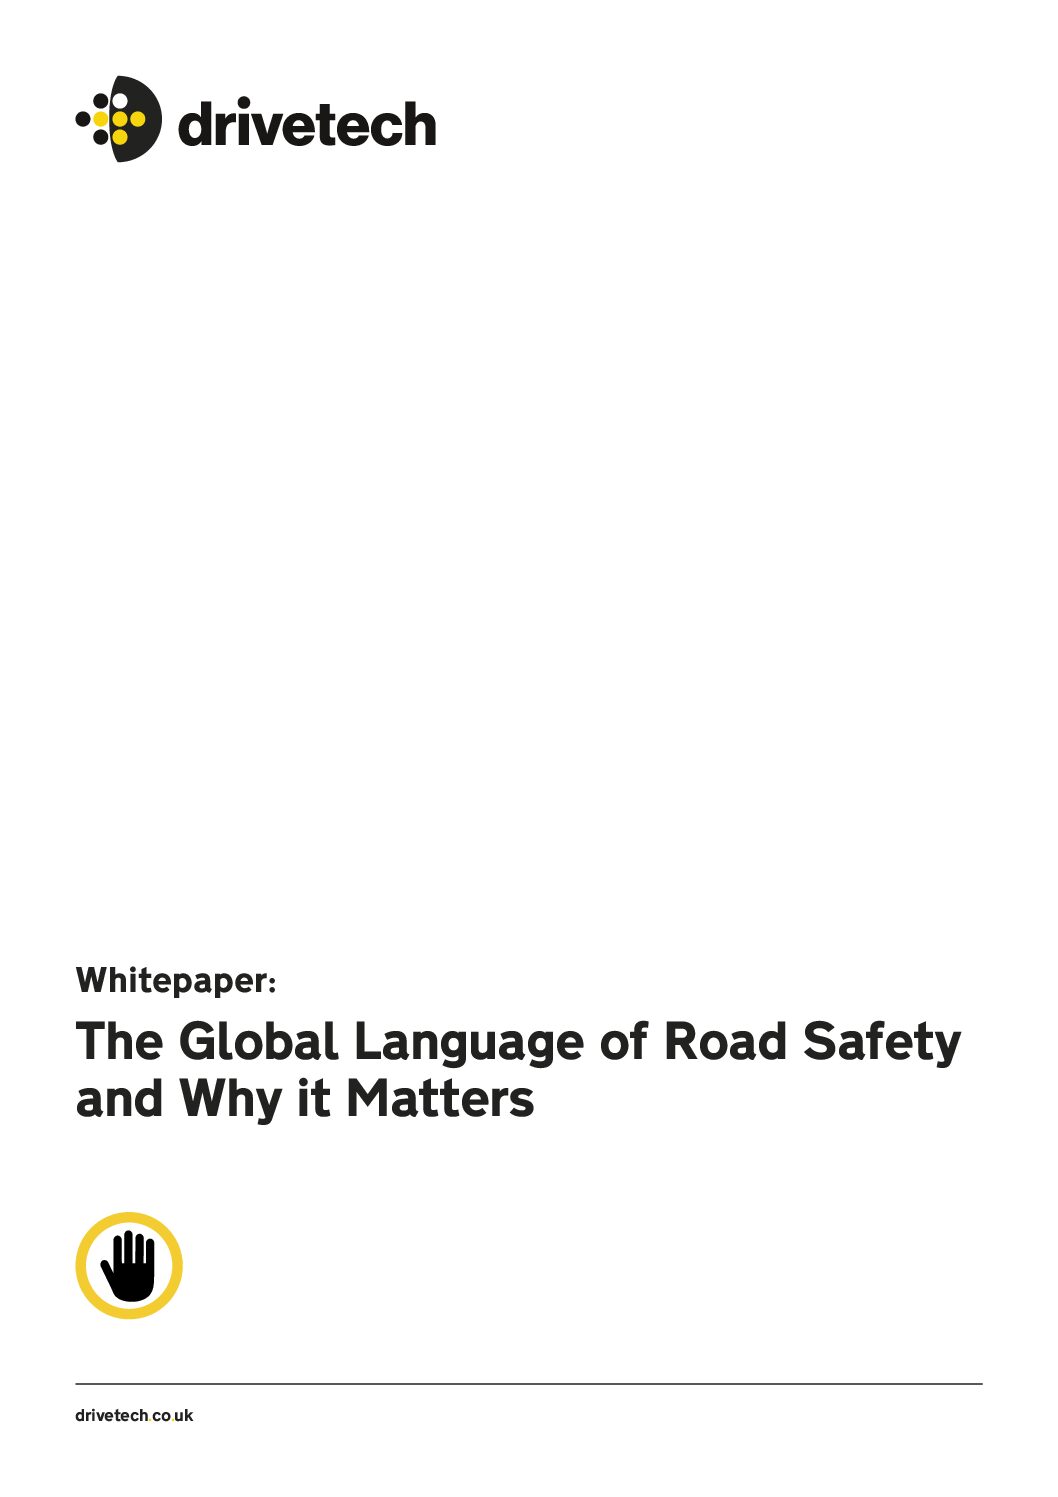 Whitepaper – The Global Language of Road Safety and Why it Matters